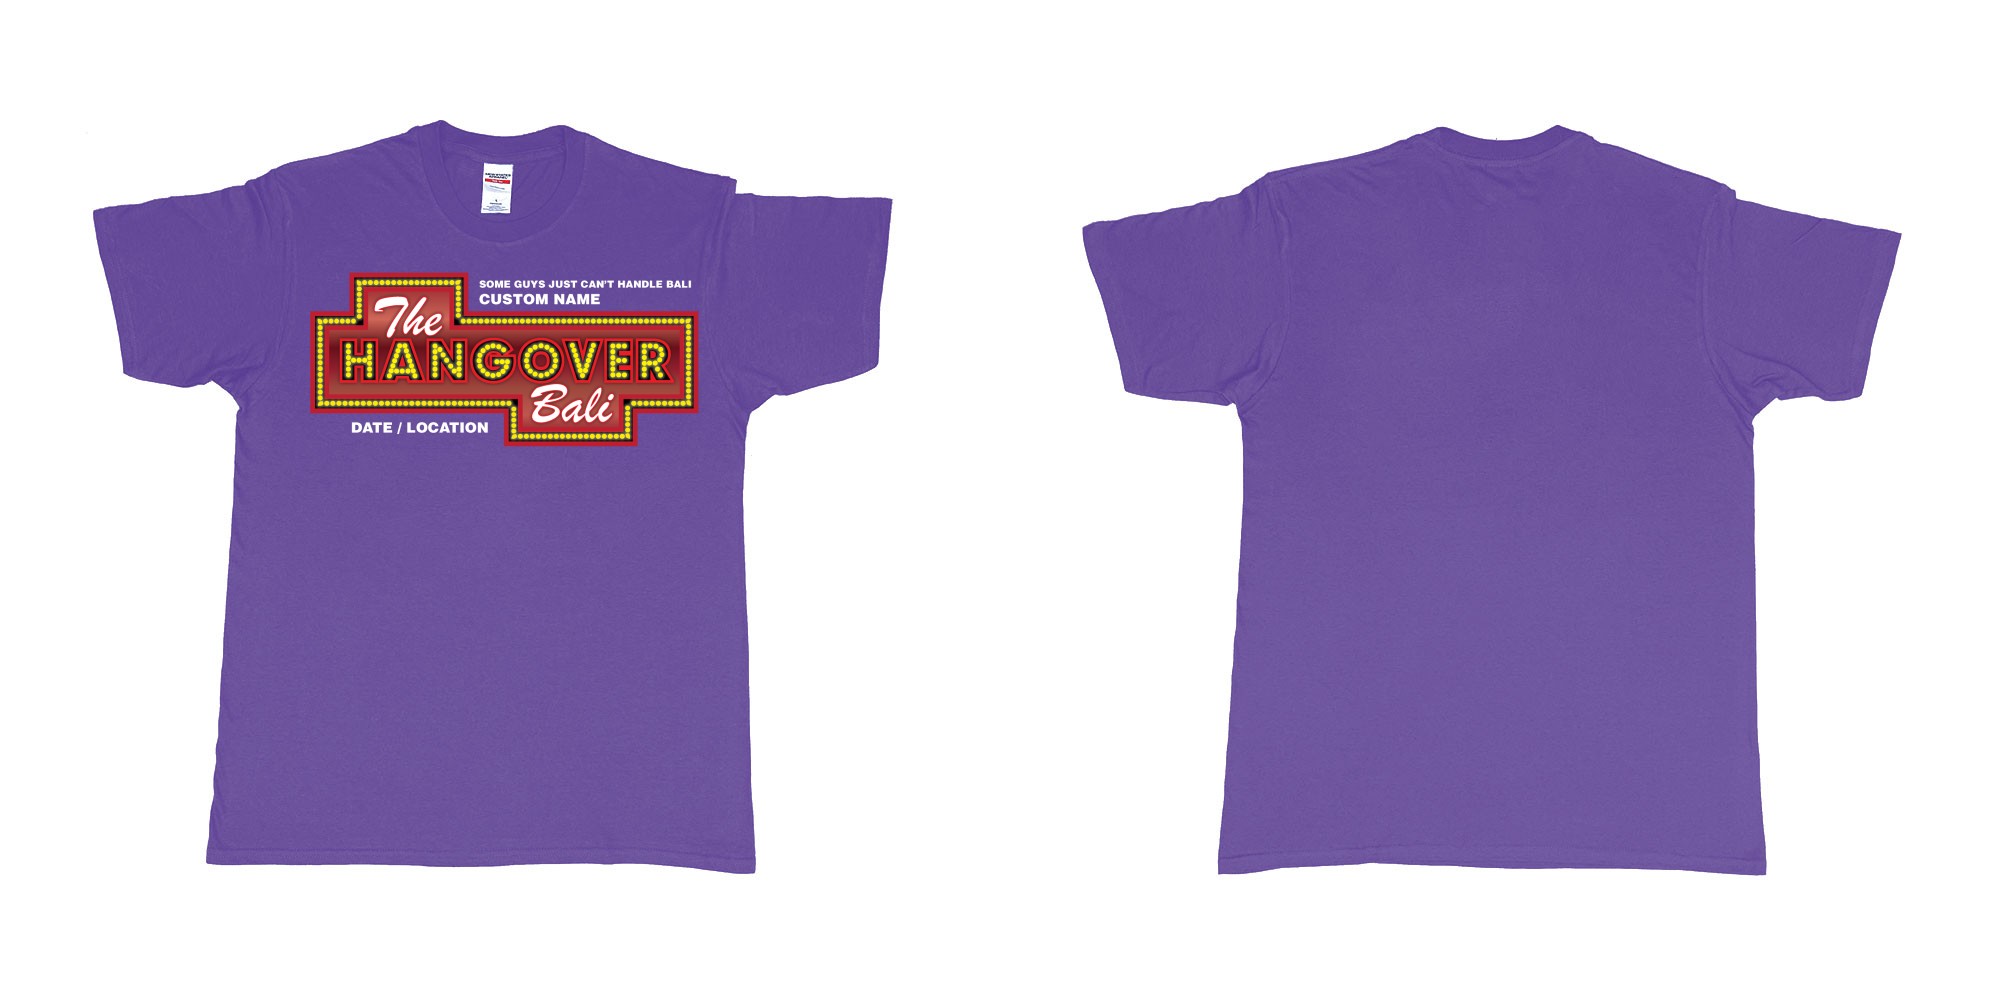 Custom tshirt design the hangover bali tour custom printing own name in fabric color purple choice your own text made in Bali by The Pirate Way